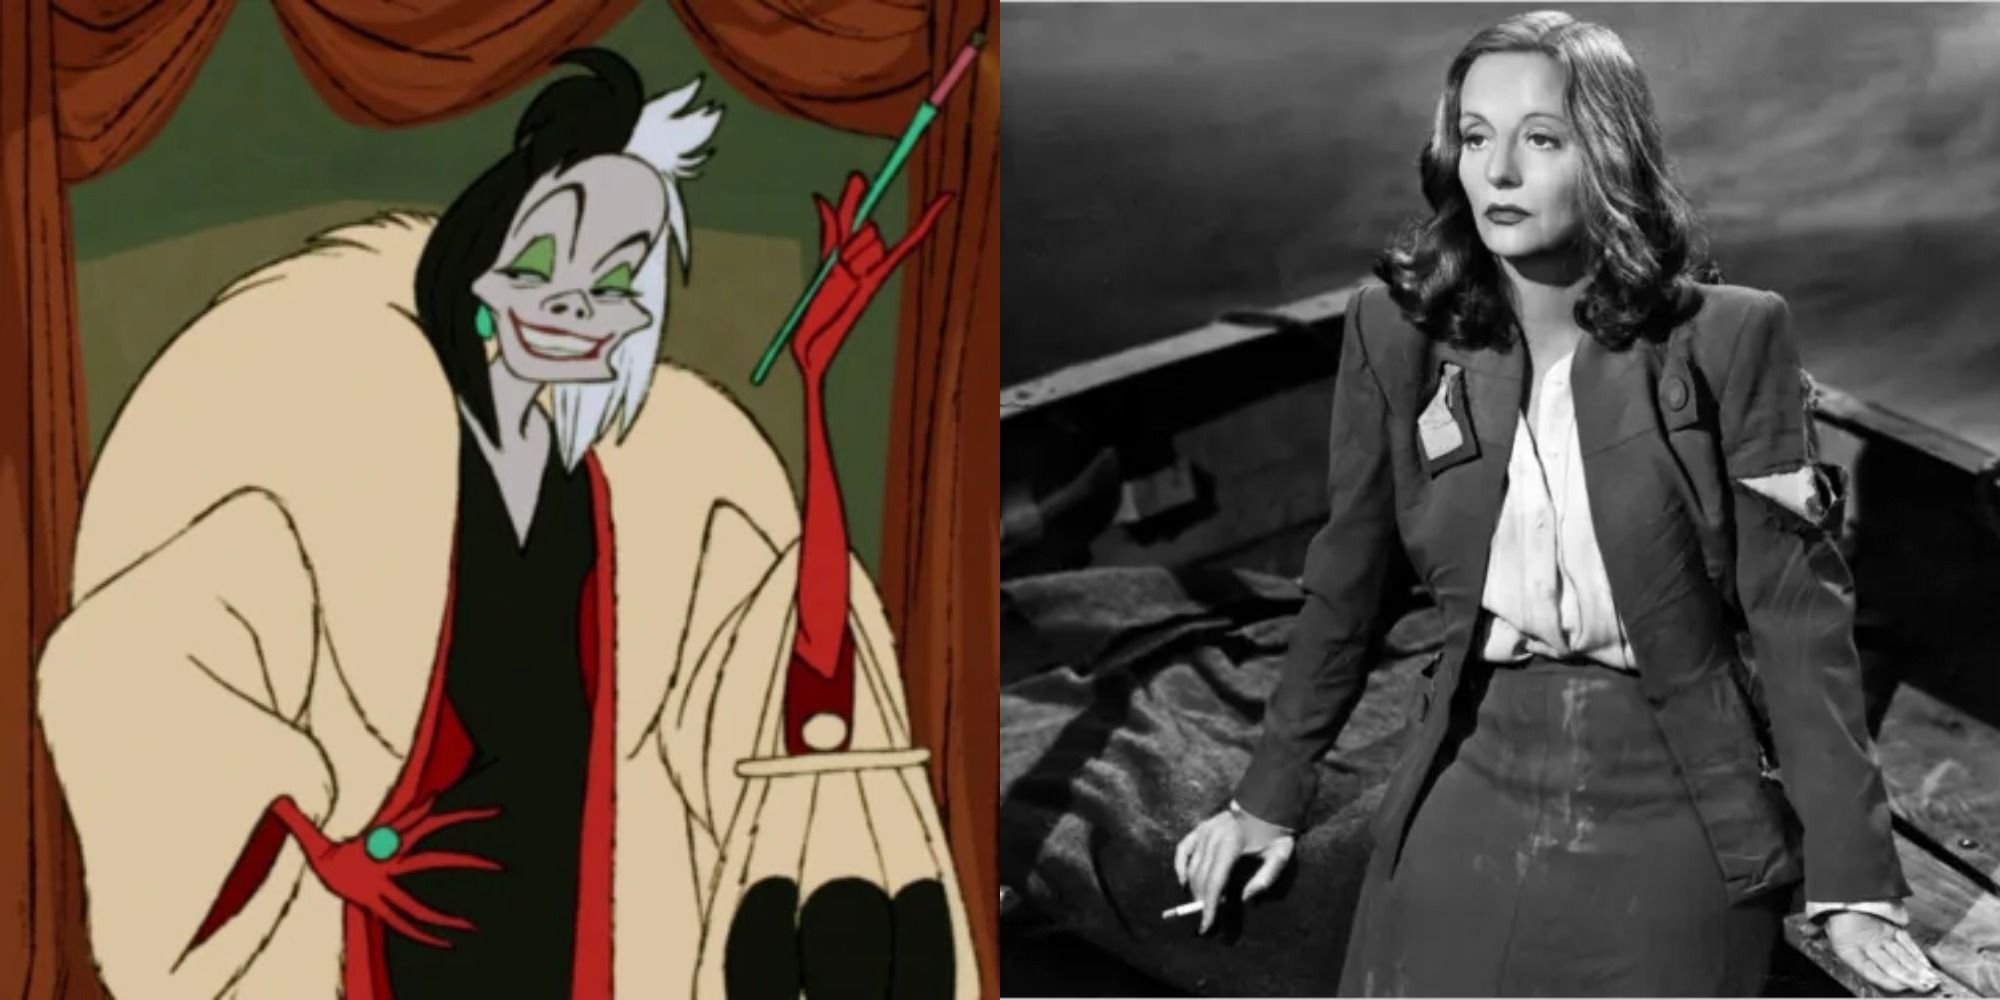 Side by side images of Cruelle de Vil and Tallulah Bankhead.